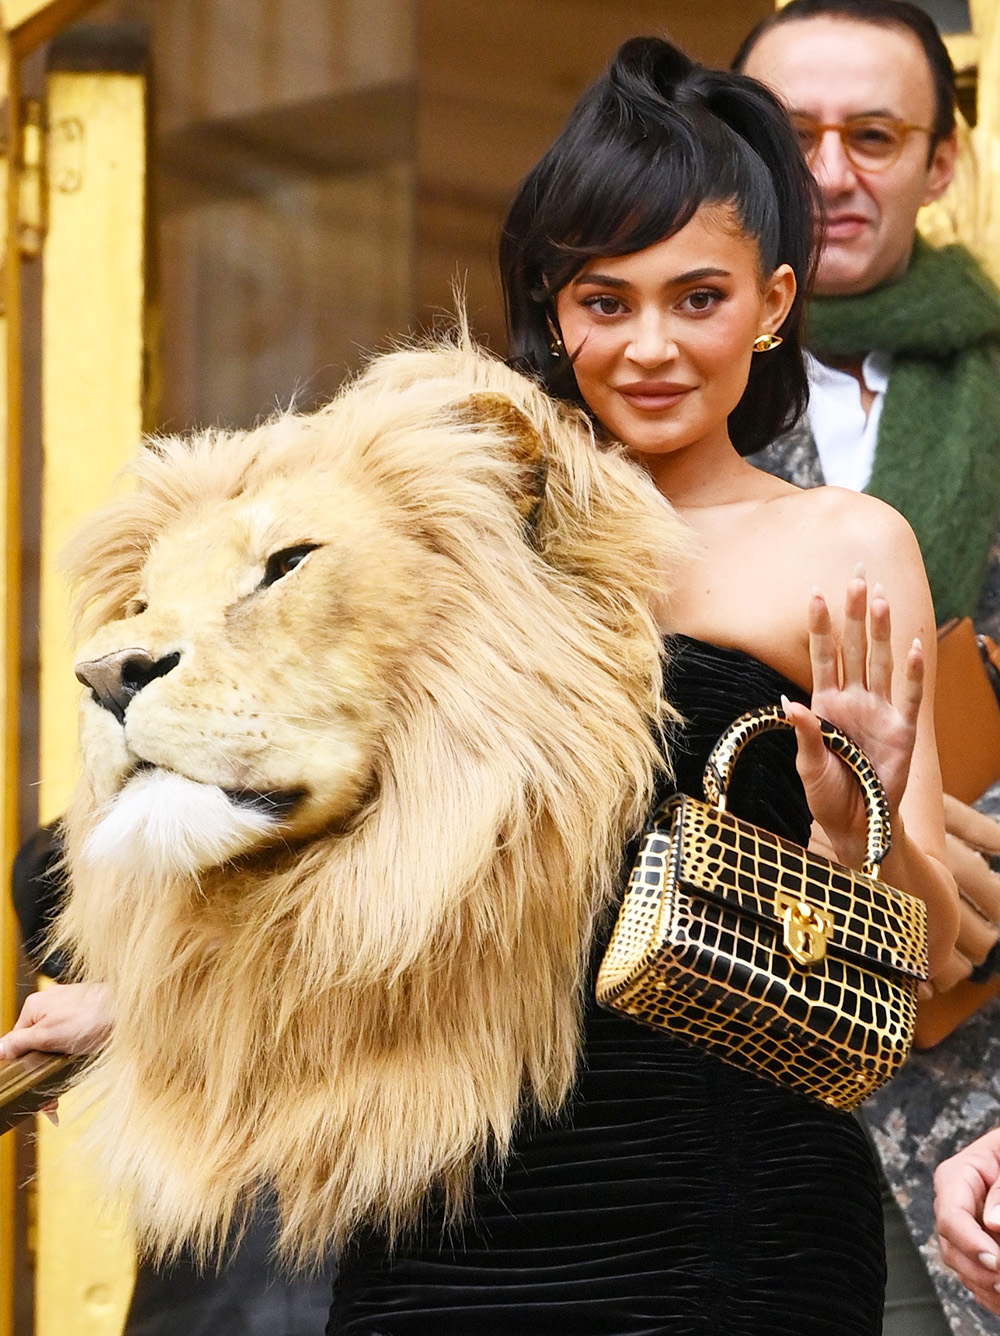 Irina Shayk Defends Lion Head Gown That She & Kylie Jenner Wore Amid Backlash